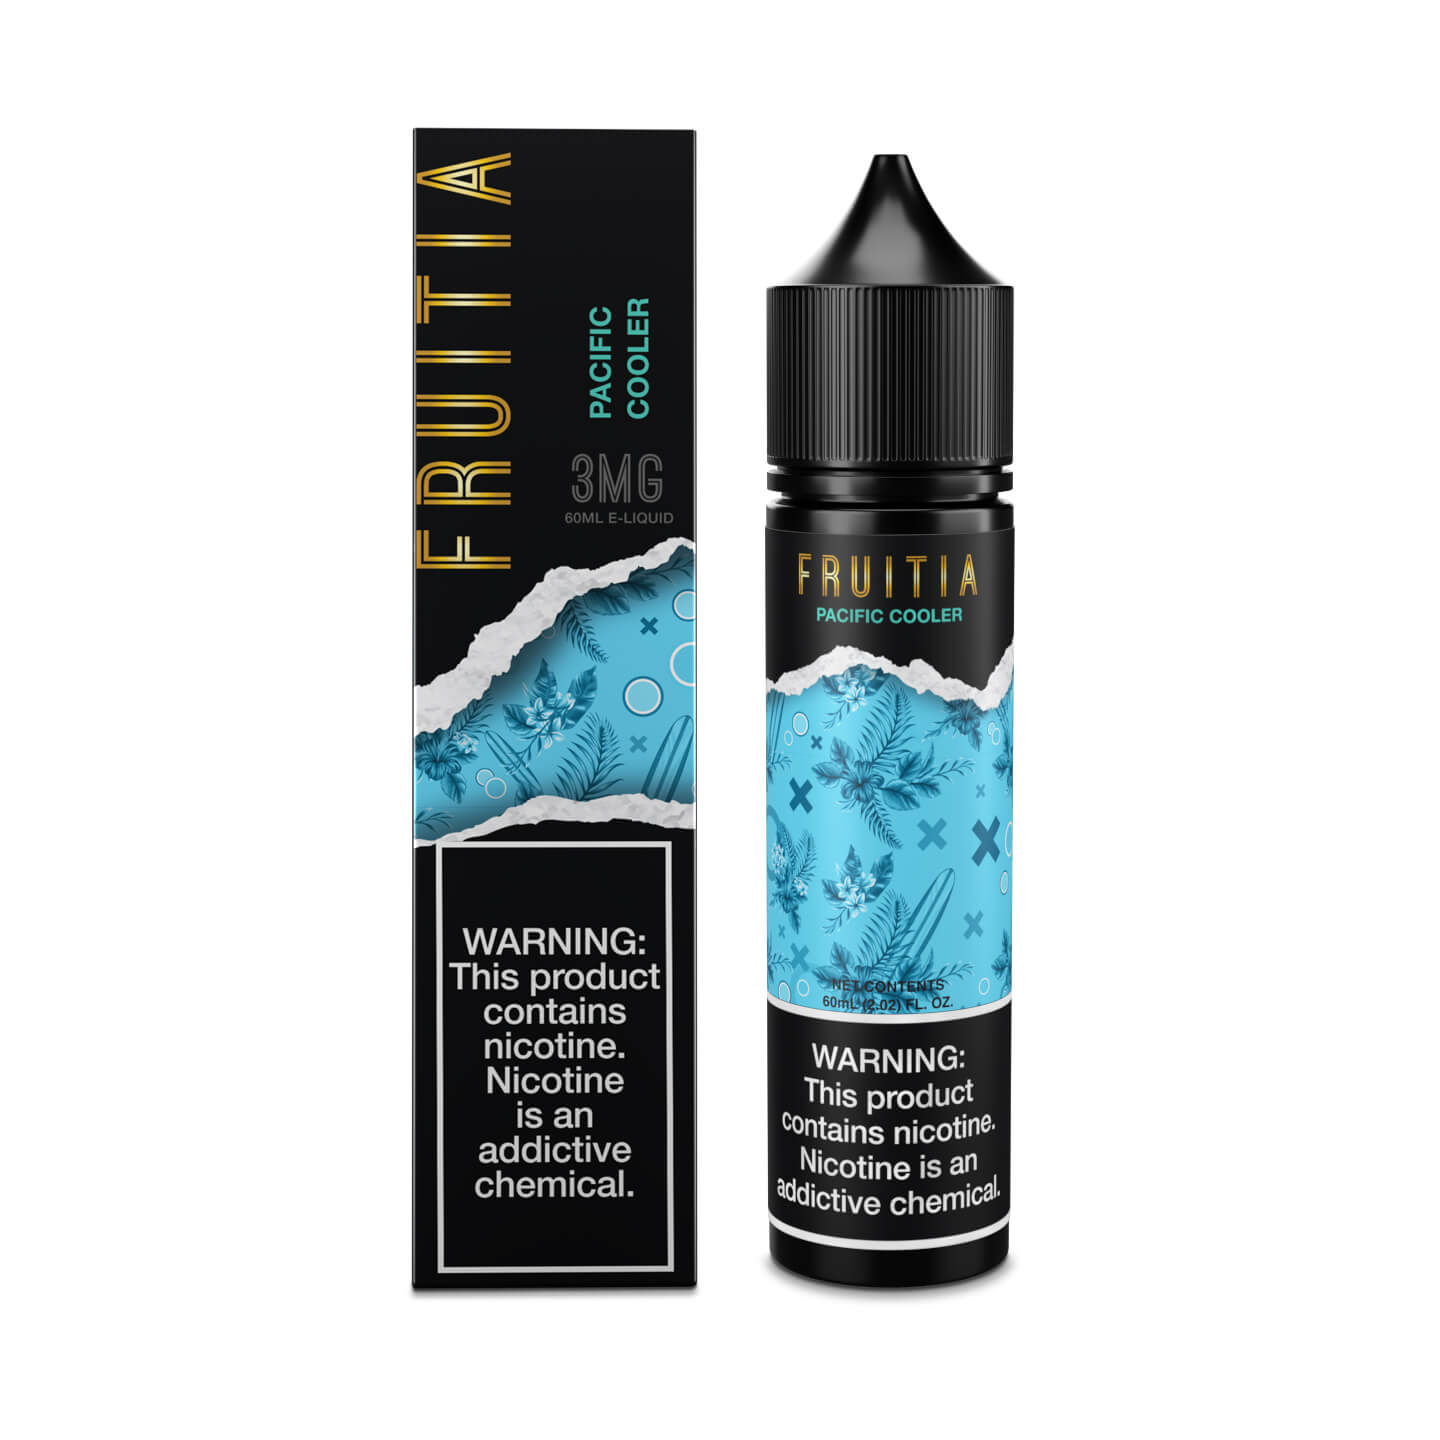 Pacific Cooler (60mL)